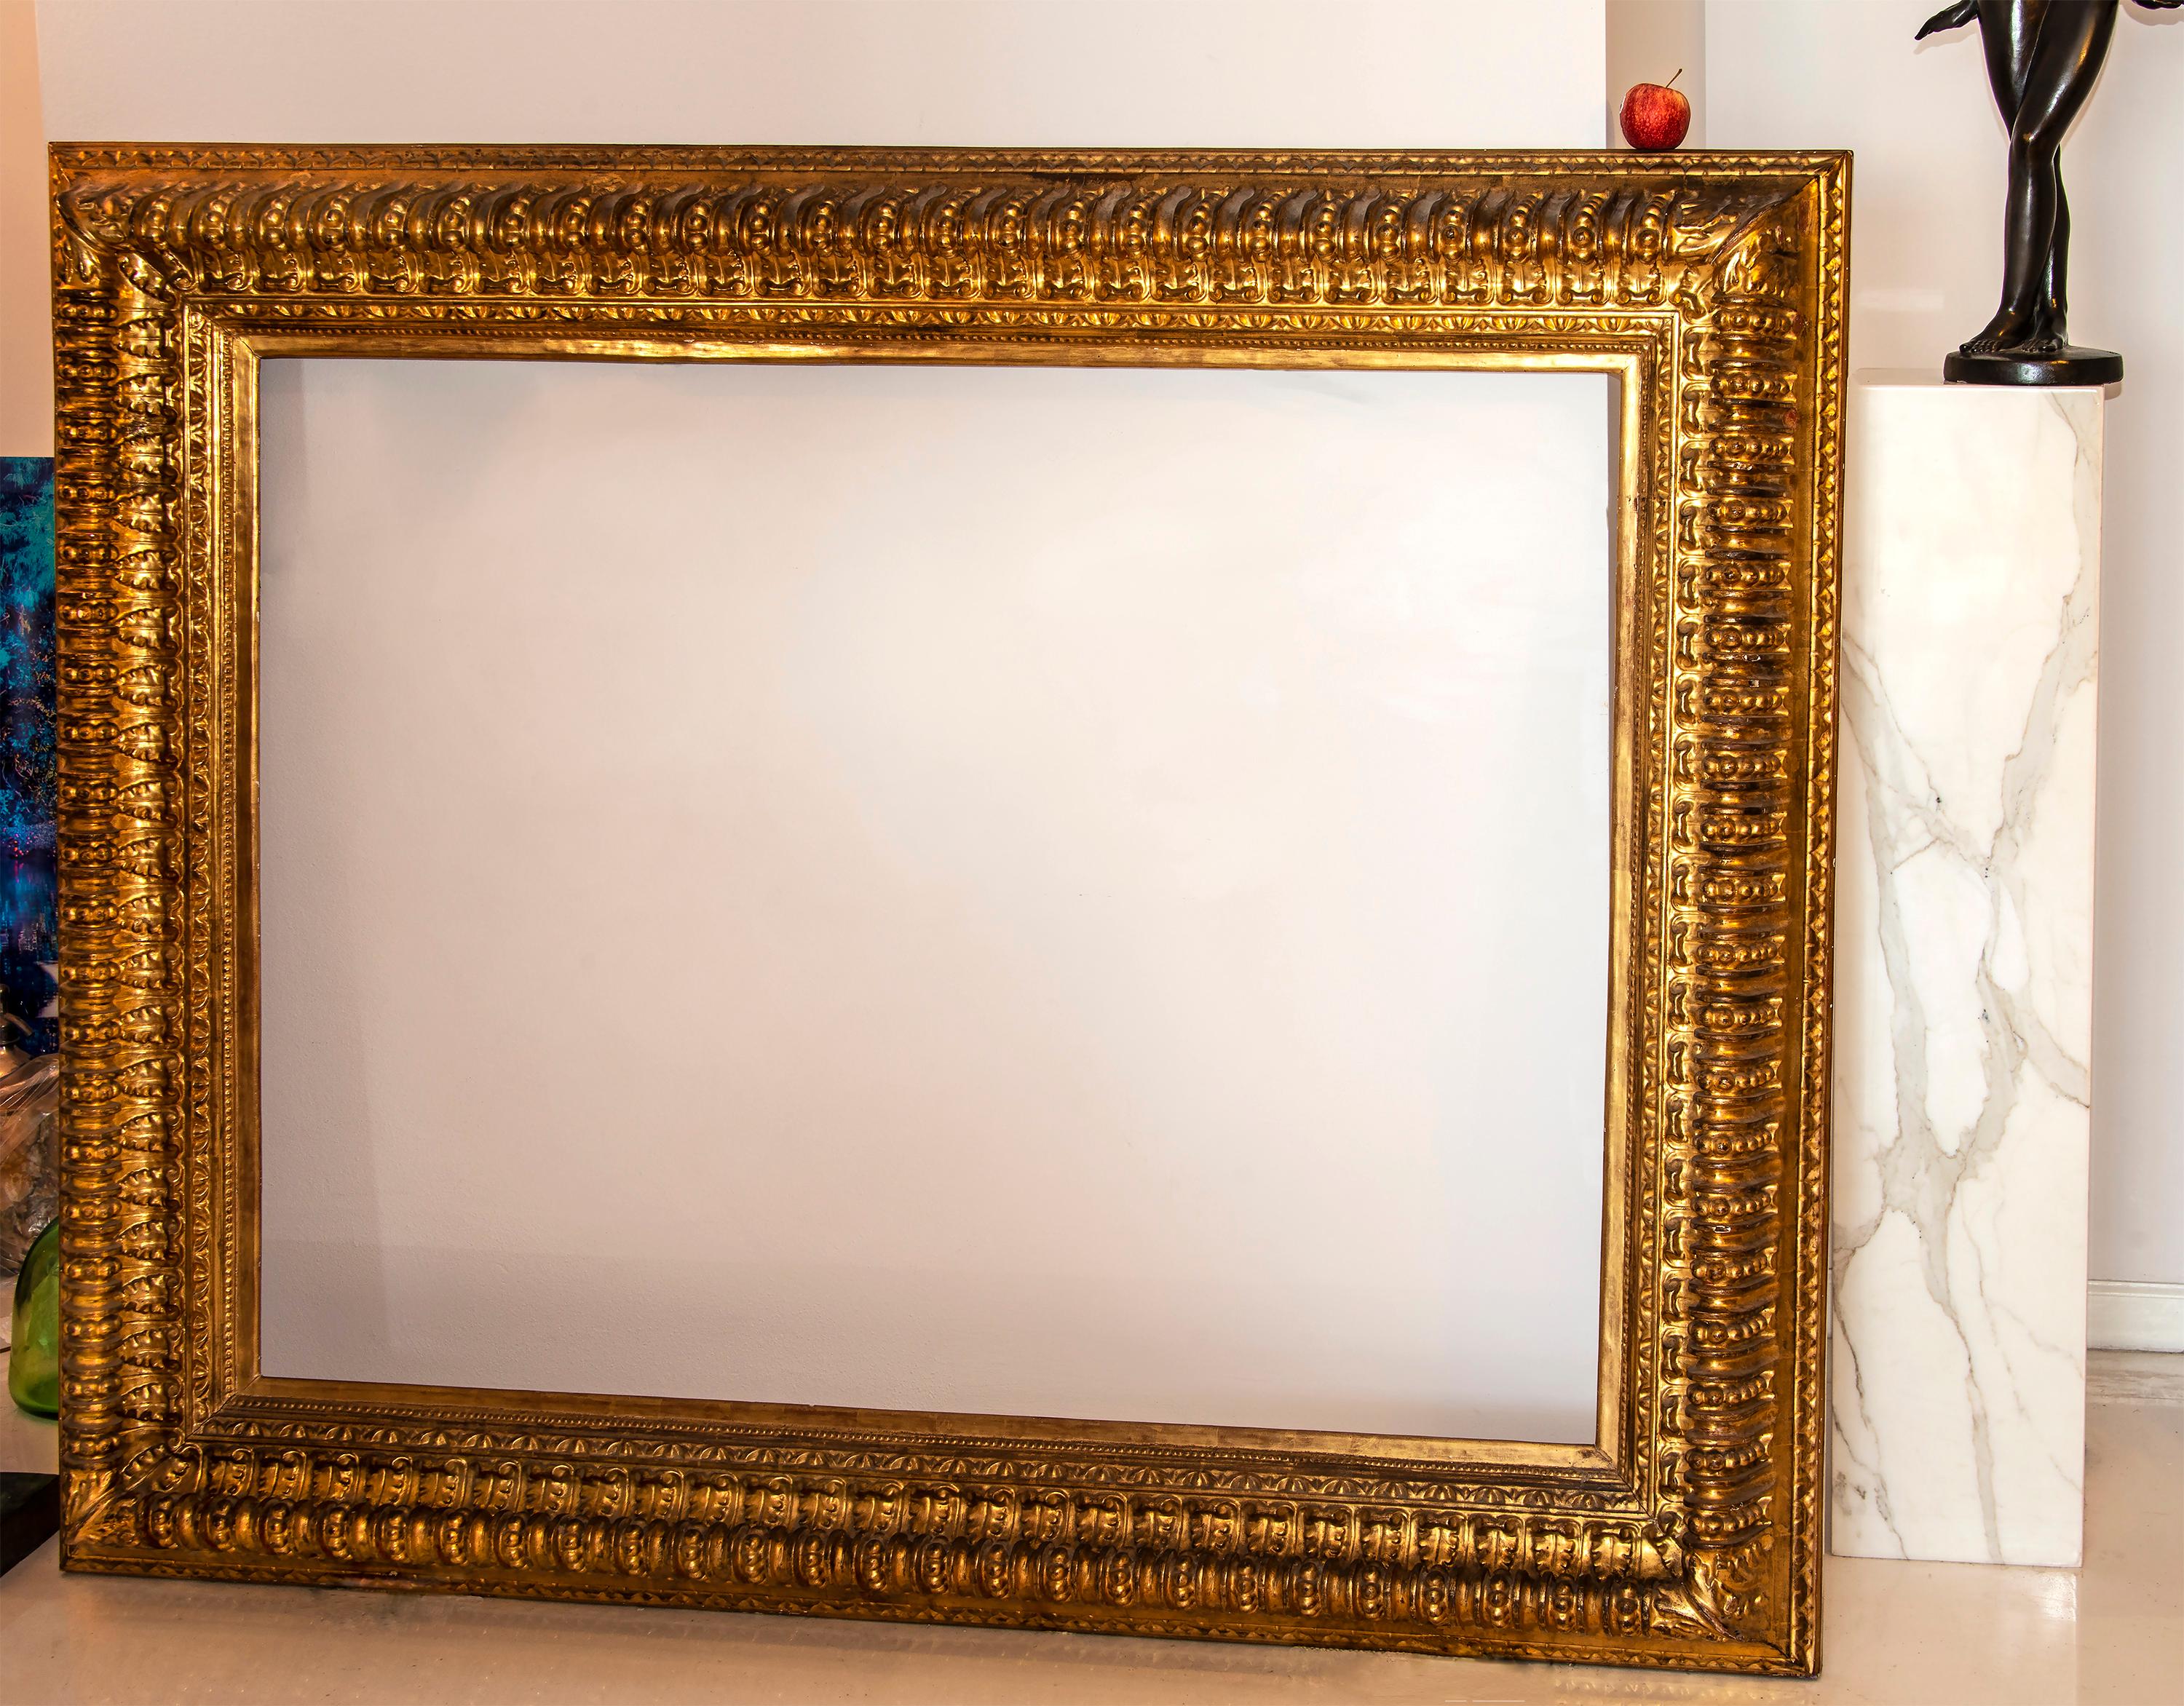 Unknown Abstract Sculpture - 19th century Italian Rococo Gilt Wood Picture frame with ornate foliate.